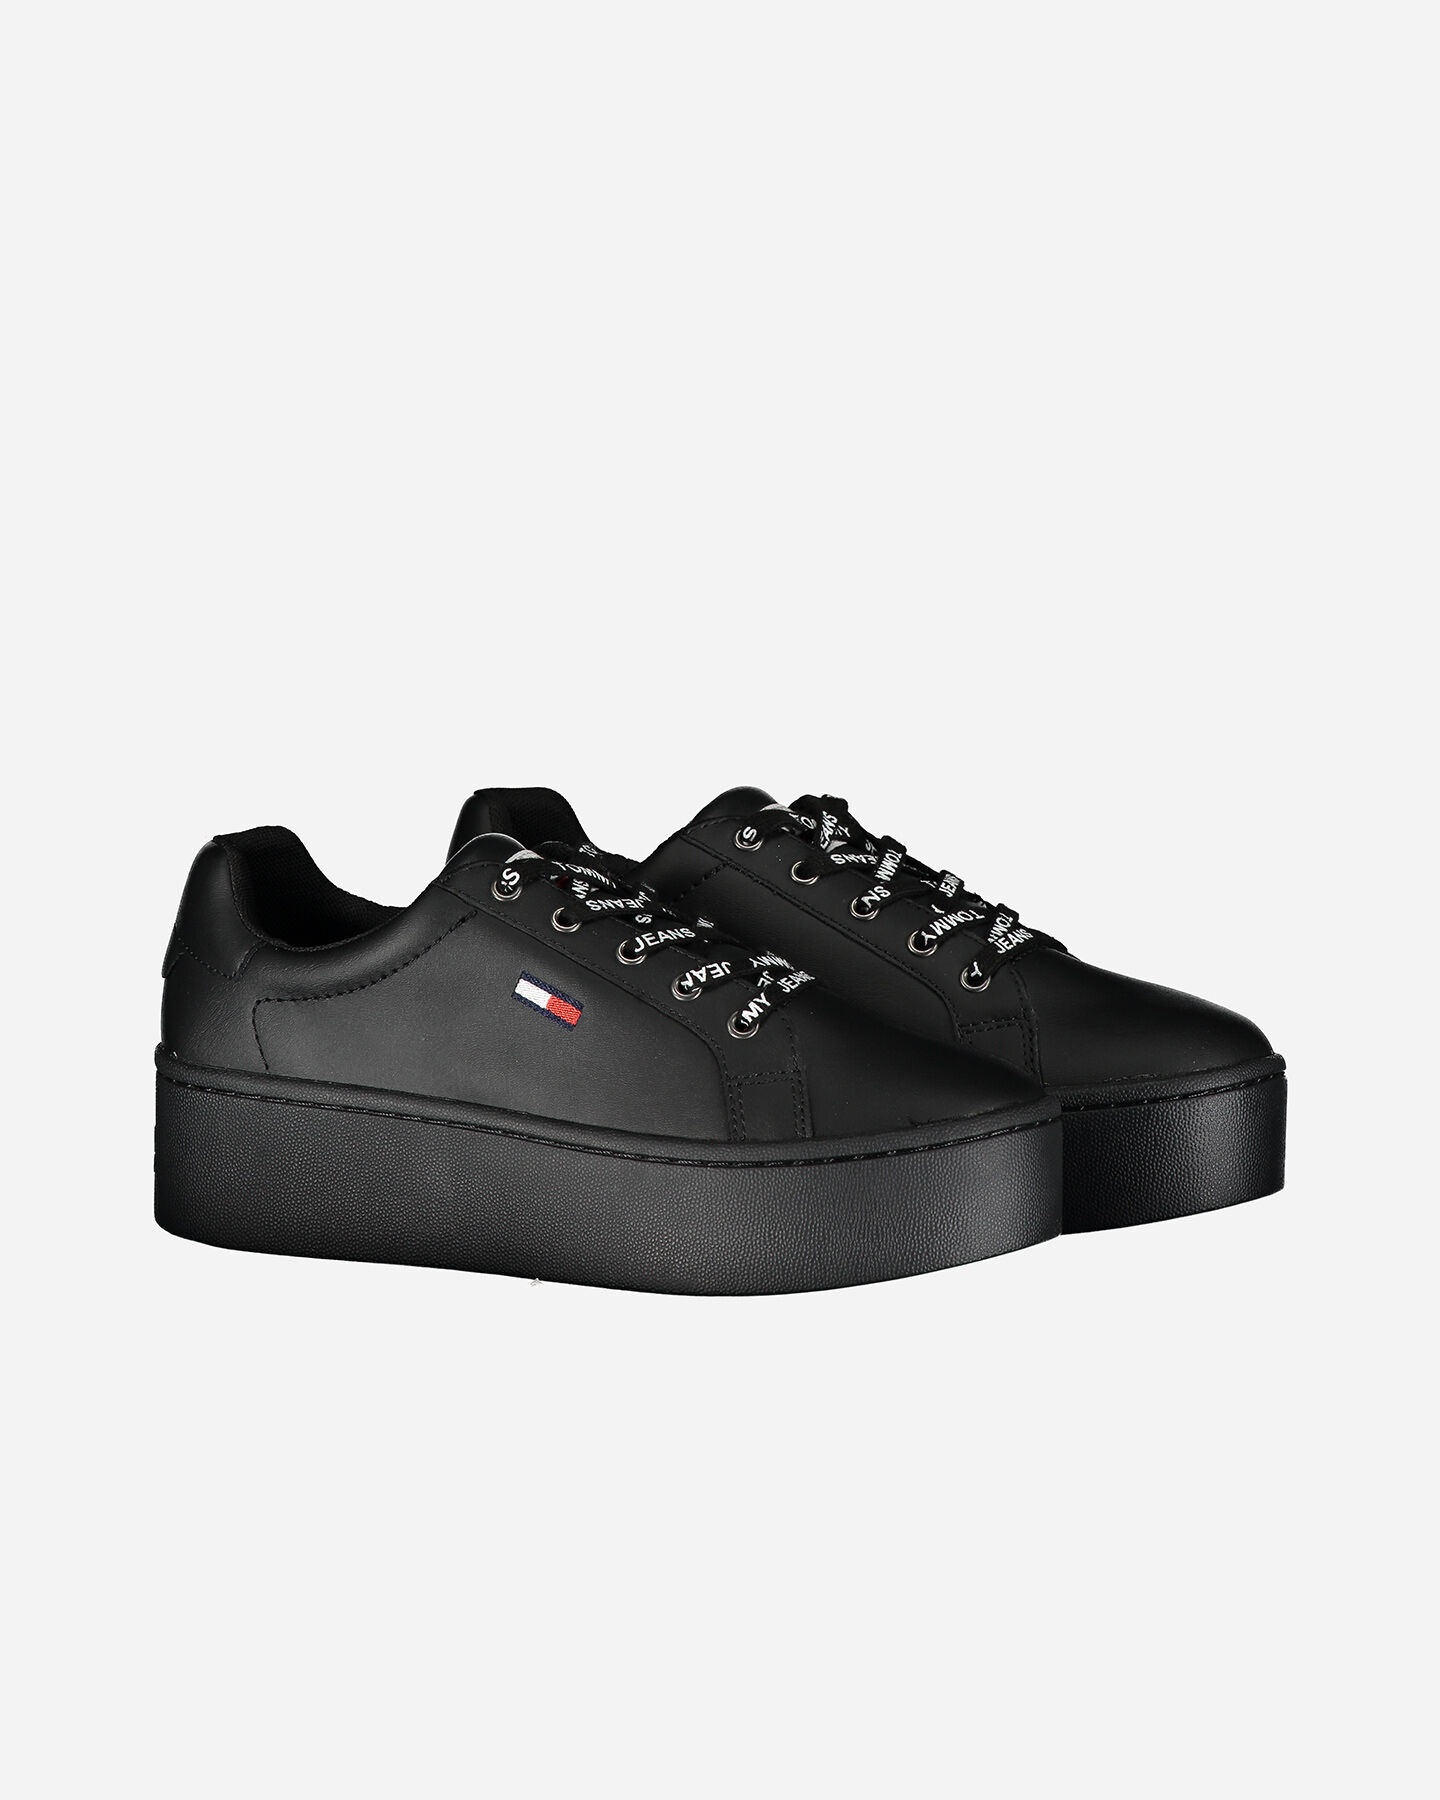  Scarpe sneakers TOMMY HILFIGER ROXIE ICONIC LEATHER FLATFORM W S4082111|BDS|36 scatto 1